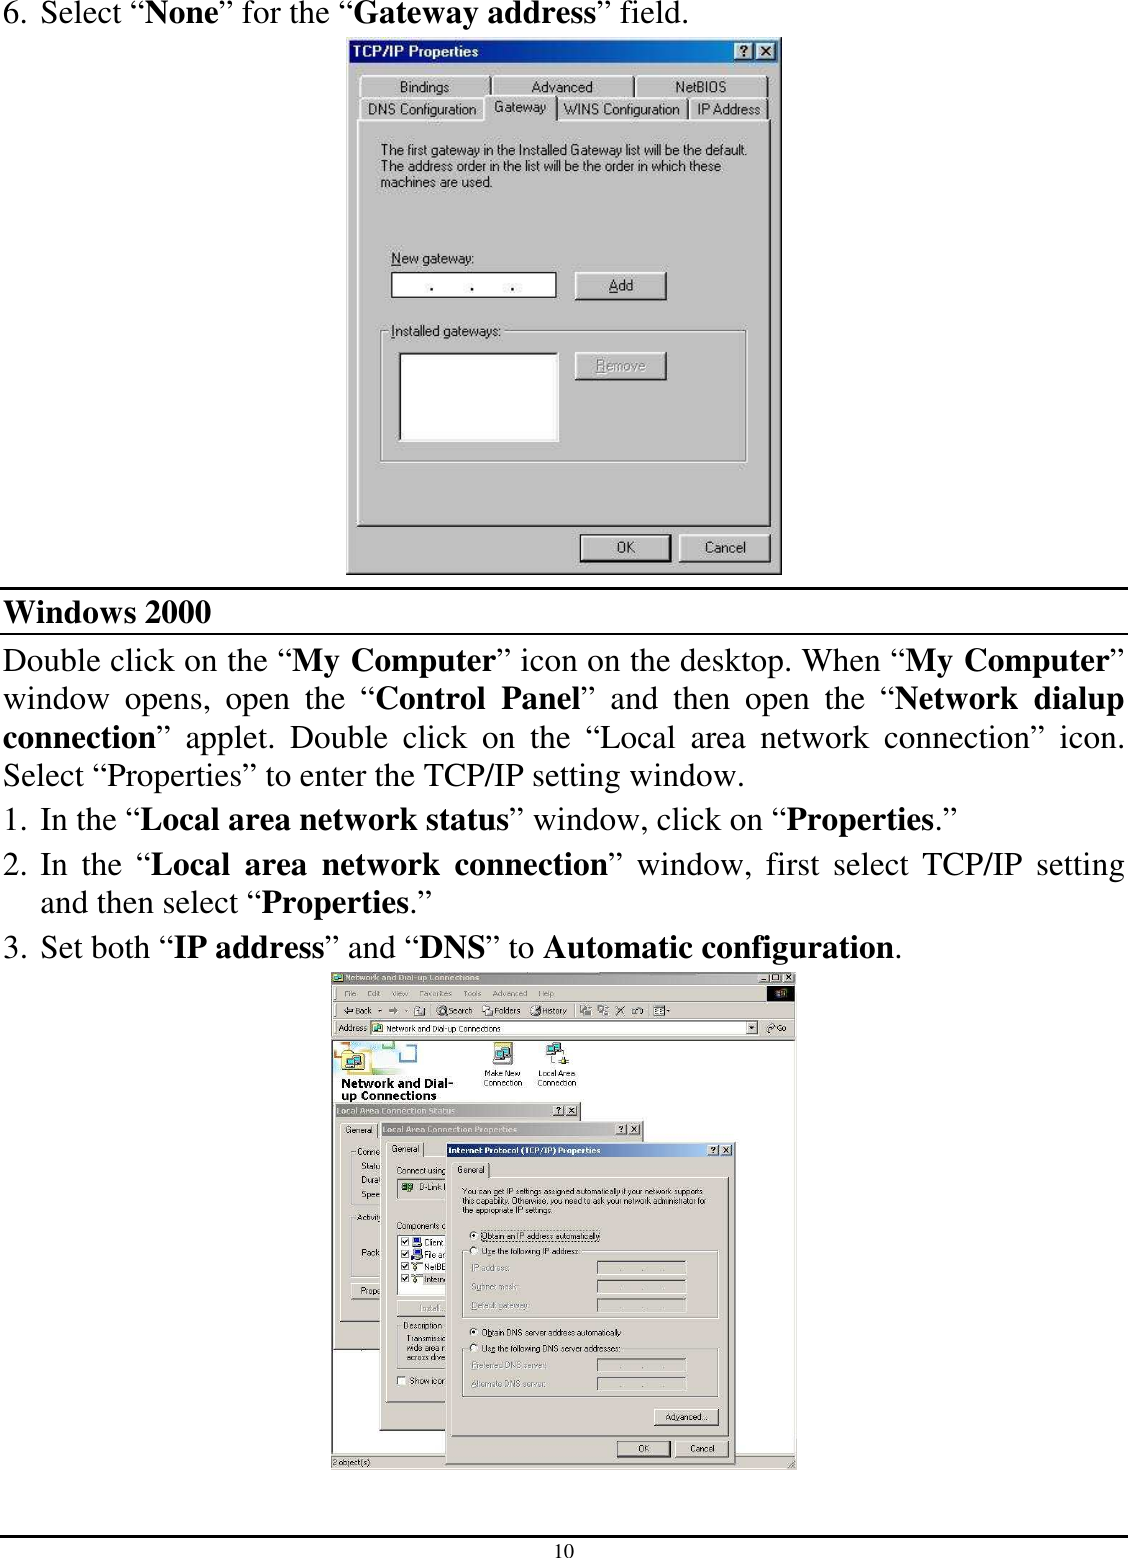 10 6. Select “None” for the “Gateway address” field.  Windows 2000 Double click on the “My Computer” icon on the desktop. When “My Computer” window  opens,  open  the  “Control  Panel”  and  then  open  the  “Network  dialup connection”  applet.  Double  click  on  the  “Local  area  network  connection”  icon. Select “Properties” to enter the TCP/IP setting window. 1. In the “Local area network status” window, click on “Properties.” 2. In  the  “Local  area  network  connection”  window,  first  select  TCP/IP  setting and then select “Properties.” 3. Set both “IP address” and “DNS” to Automatic configuration.  